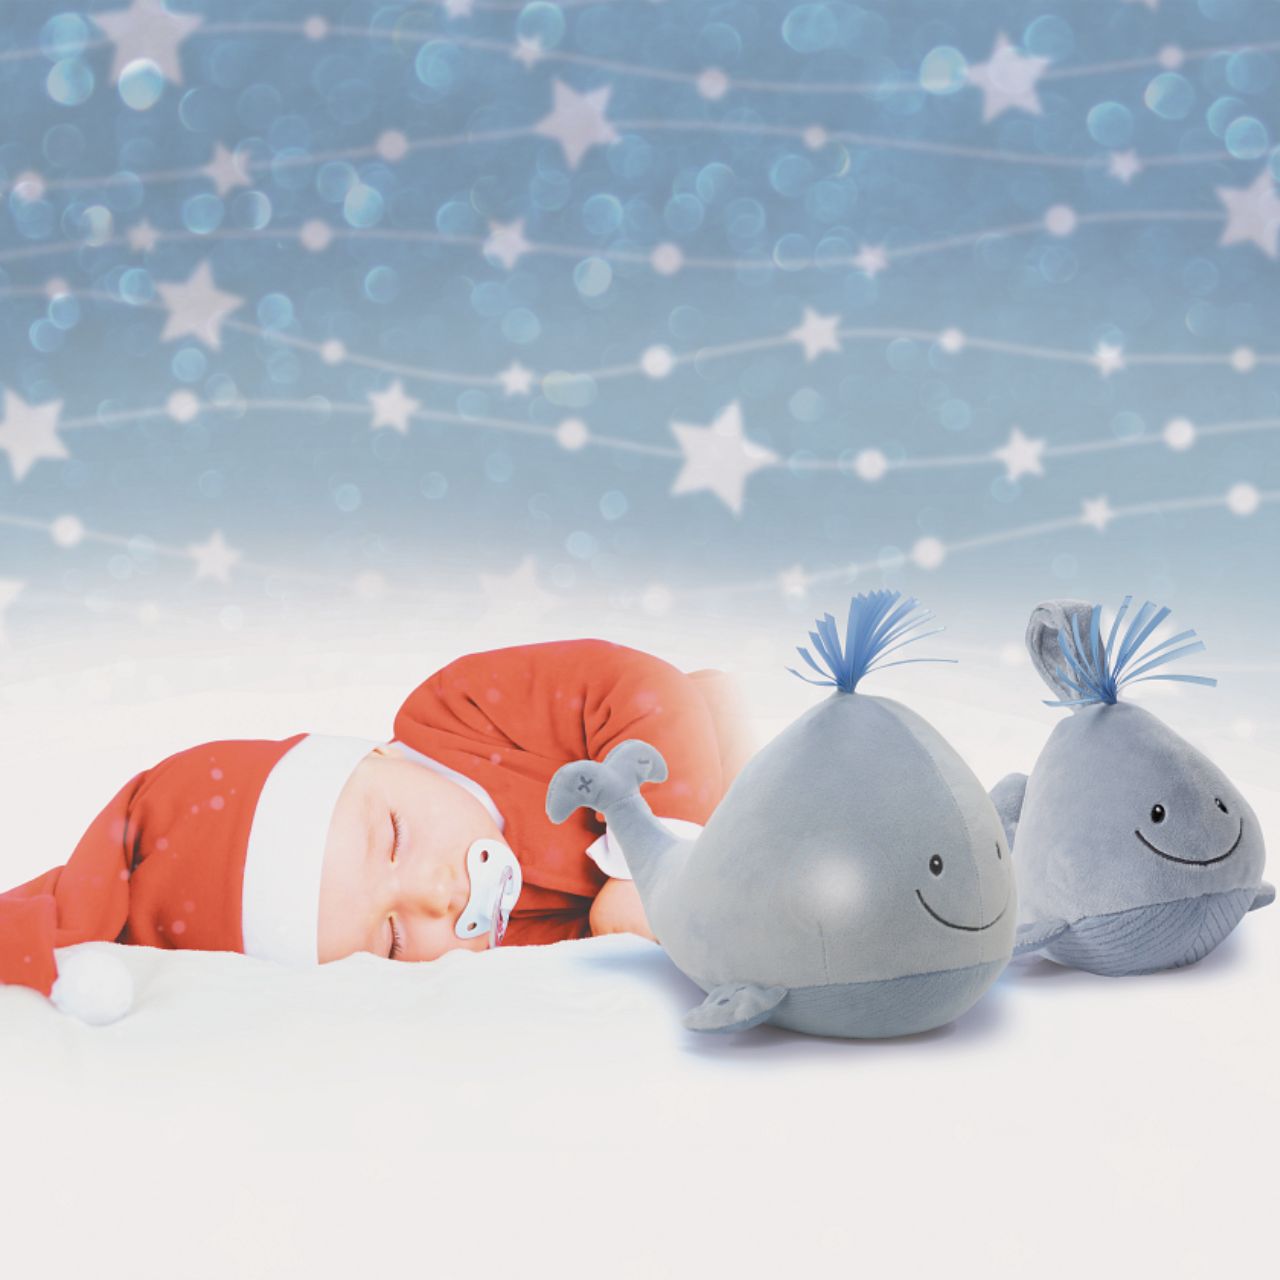 GUND Baby Sleepy Seas Light & Sound Whale - Small  This musical plush toy will help your babies drift off to sleep. The whale is presented in an oh-so-soft light blue fabric, with blue ribbons for its hair, and dark embroidery creating a smiling face. Press the left fin and the animated whale splashes into life. Press the musical note on its right fin and the plush starts to play one of five different noises: